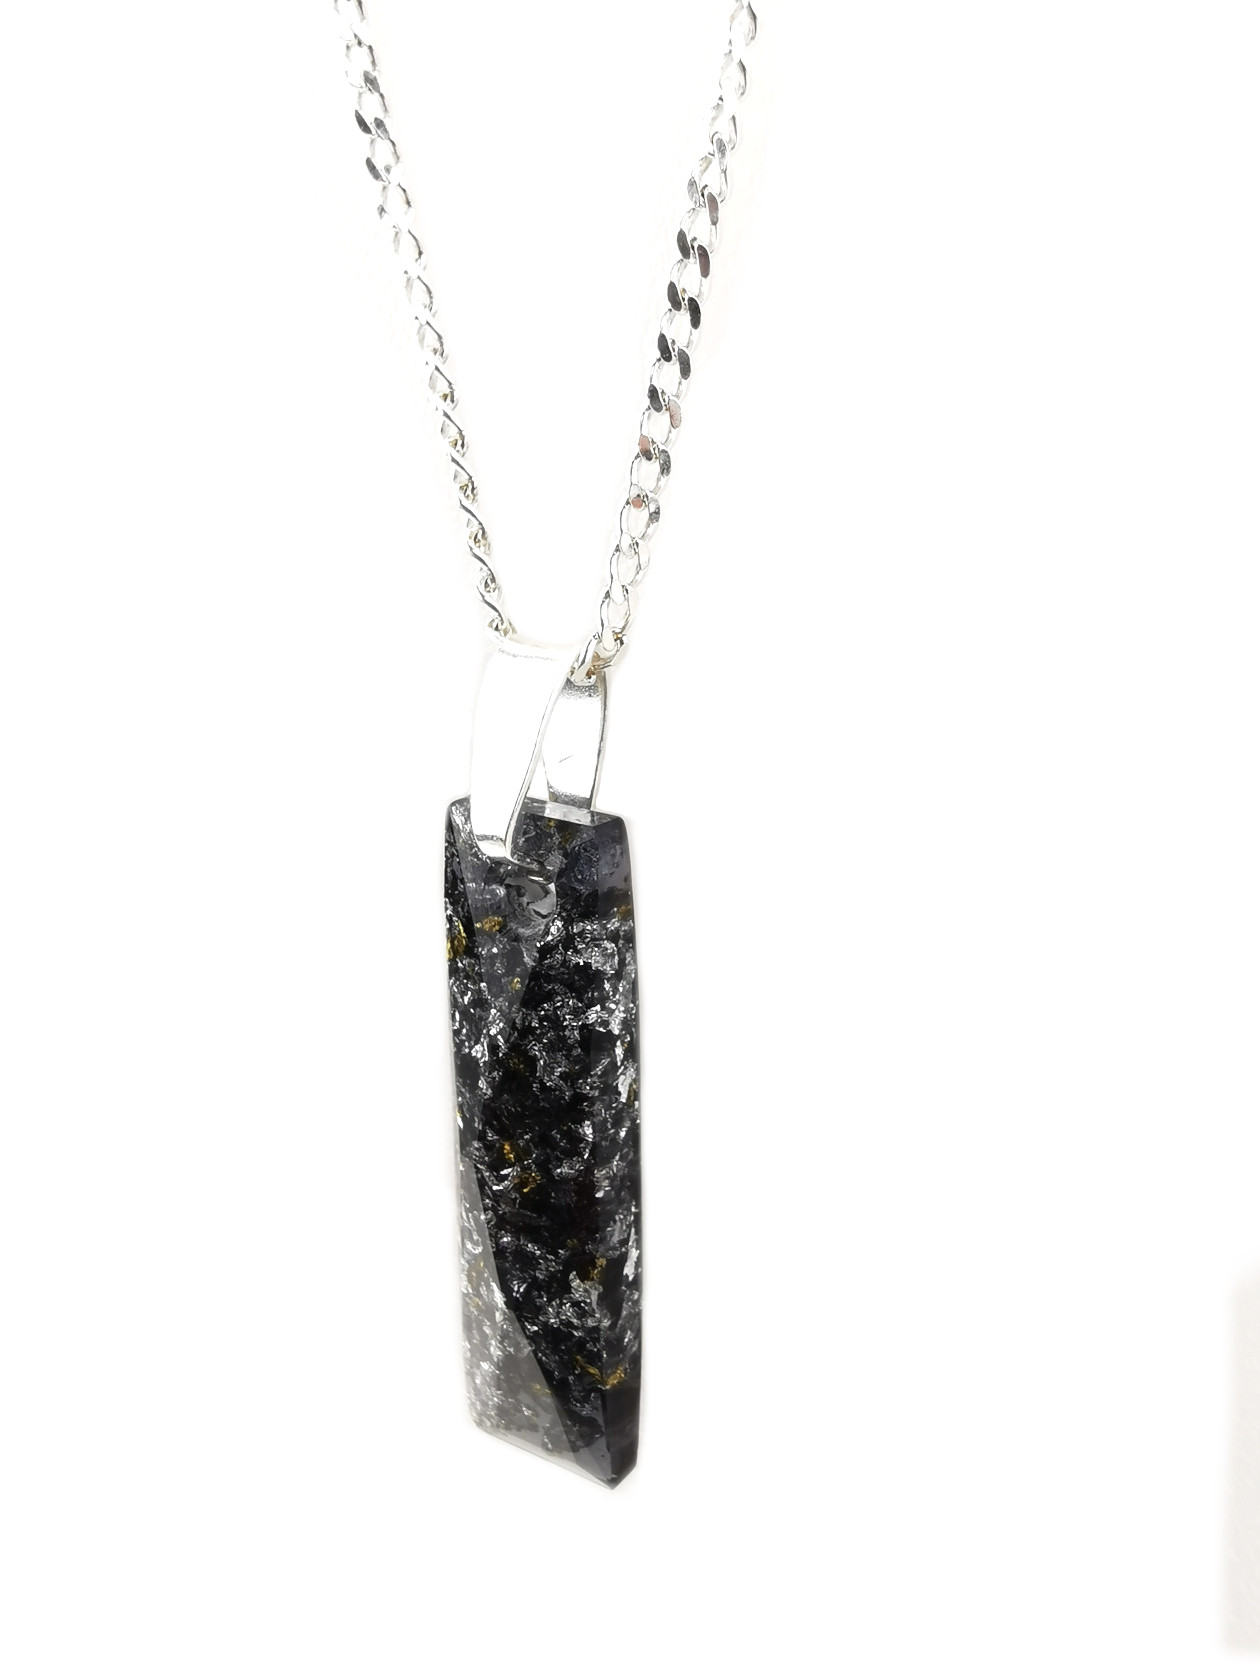 Black Queen Baguette Orgone Jewelry Pendant by OrgoneVibes